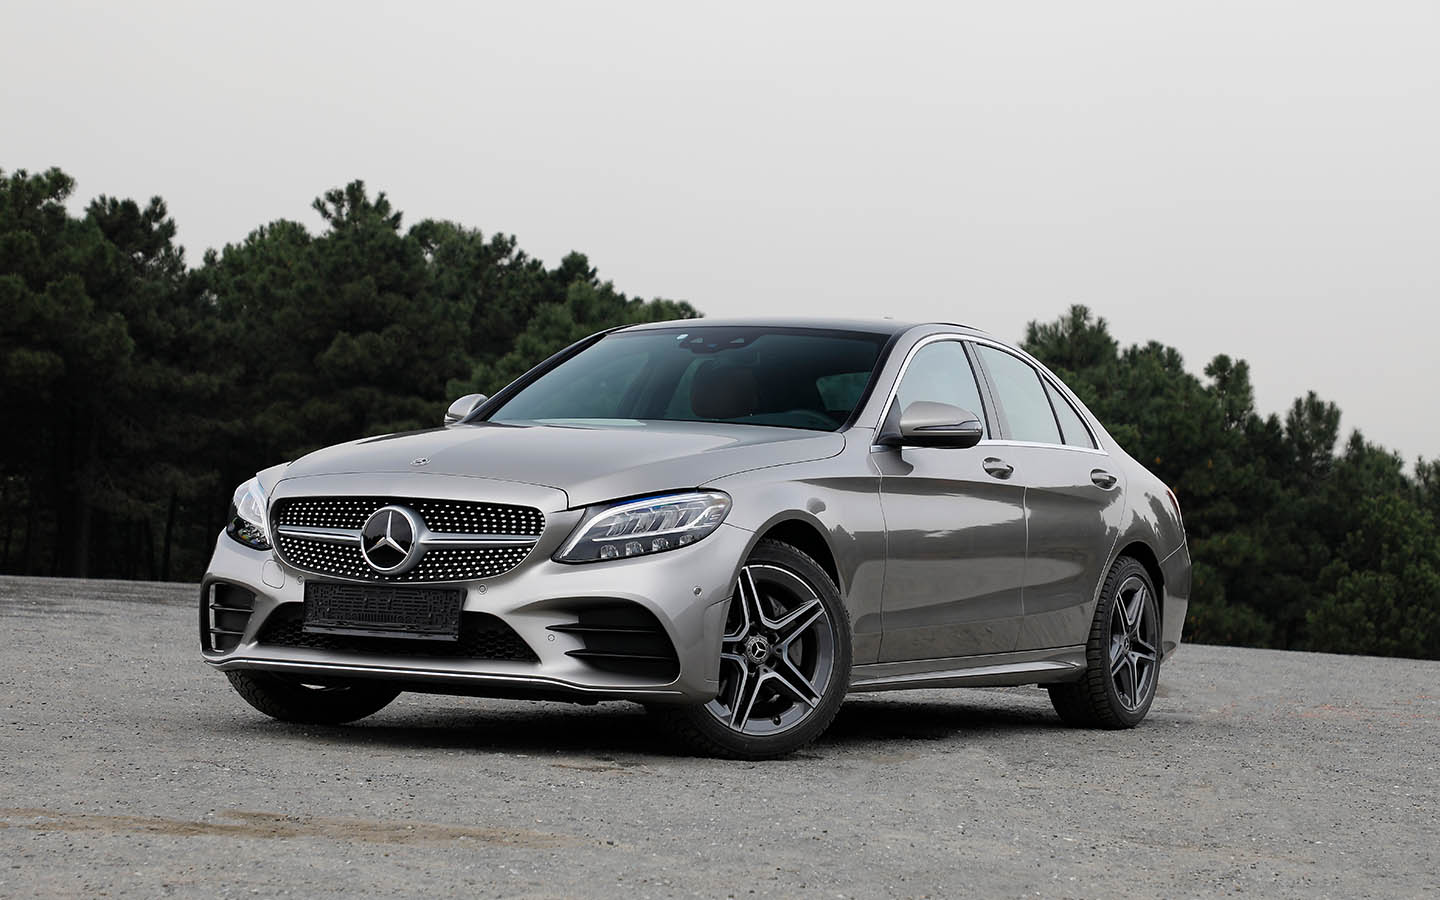 the Mercedes S-Class comes with remarkable specs